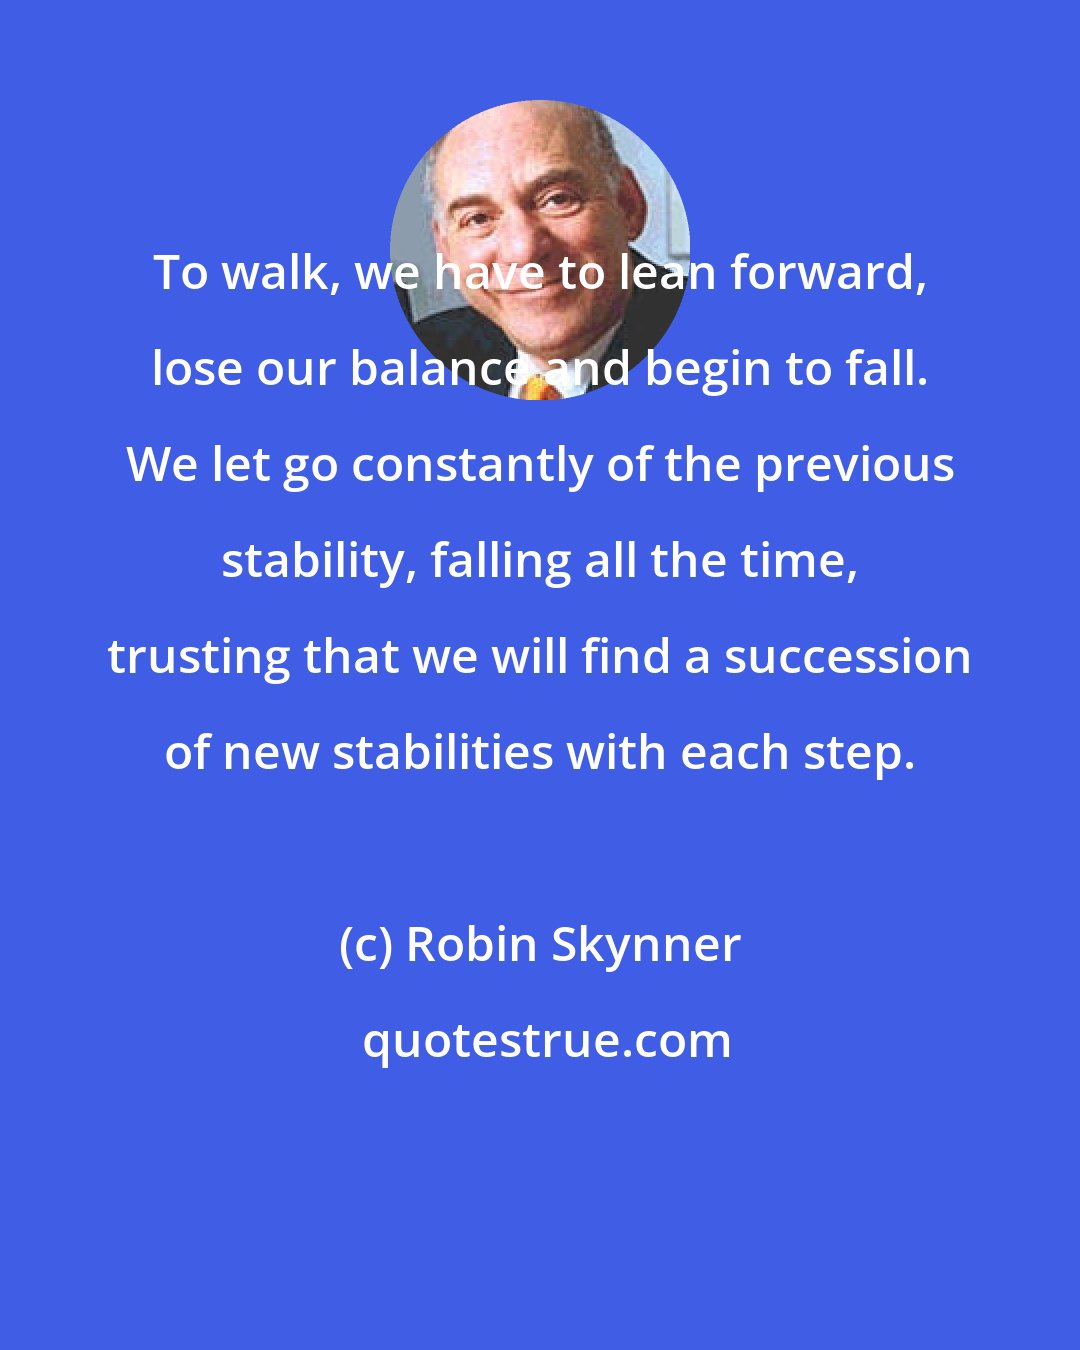 Robin Skynner: To walk, we have to lean forward, lose our balance and begin to fall. We let go constantly of the previous stability, falling all the time, trusting that we will find a succession of new stabilities with each step.